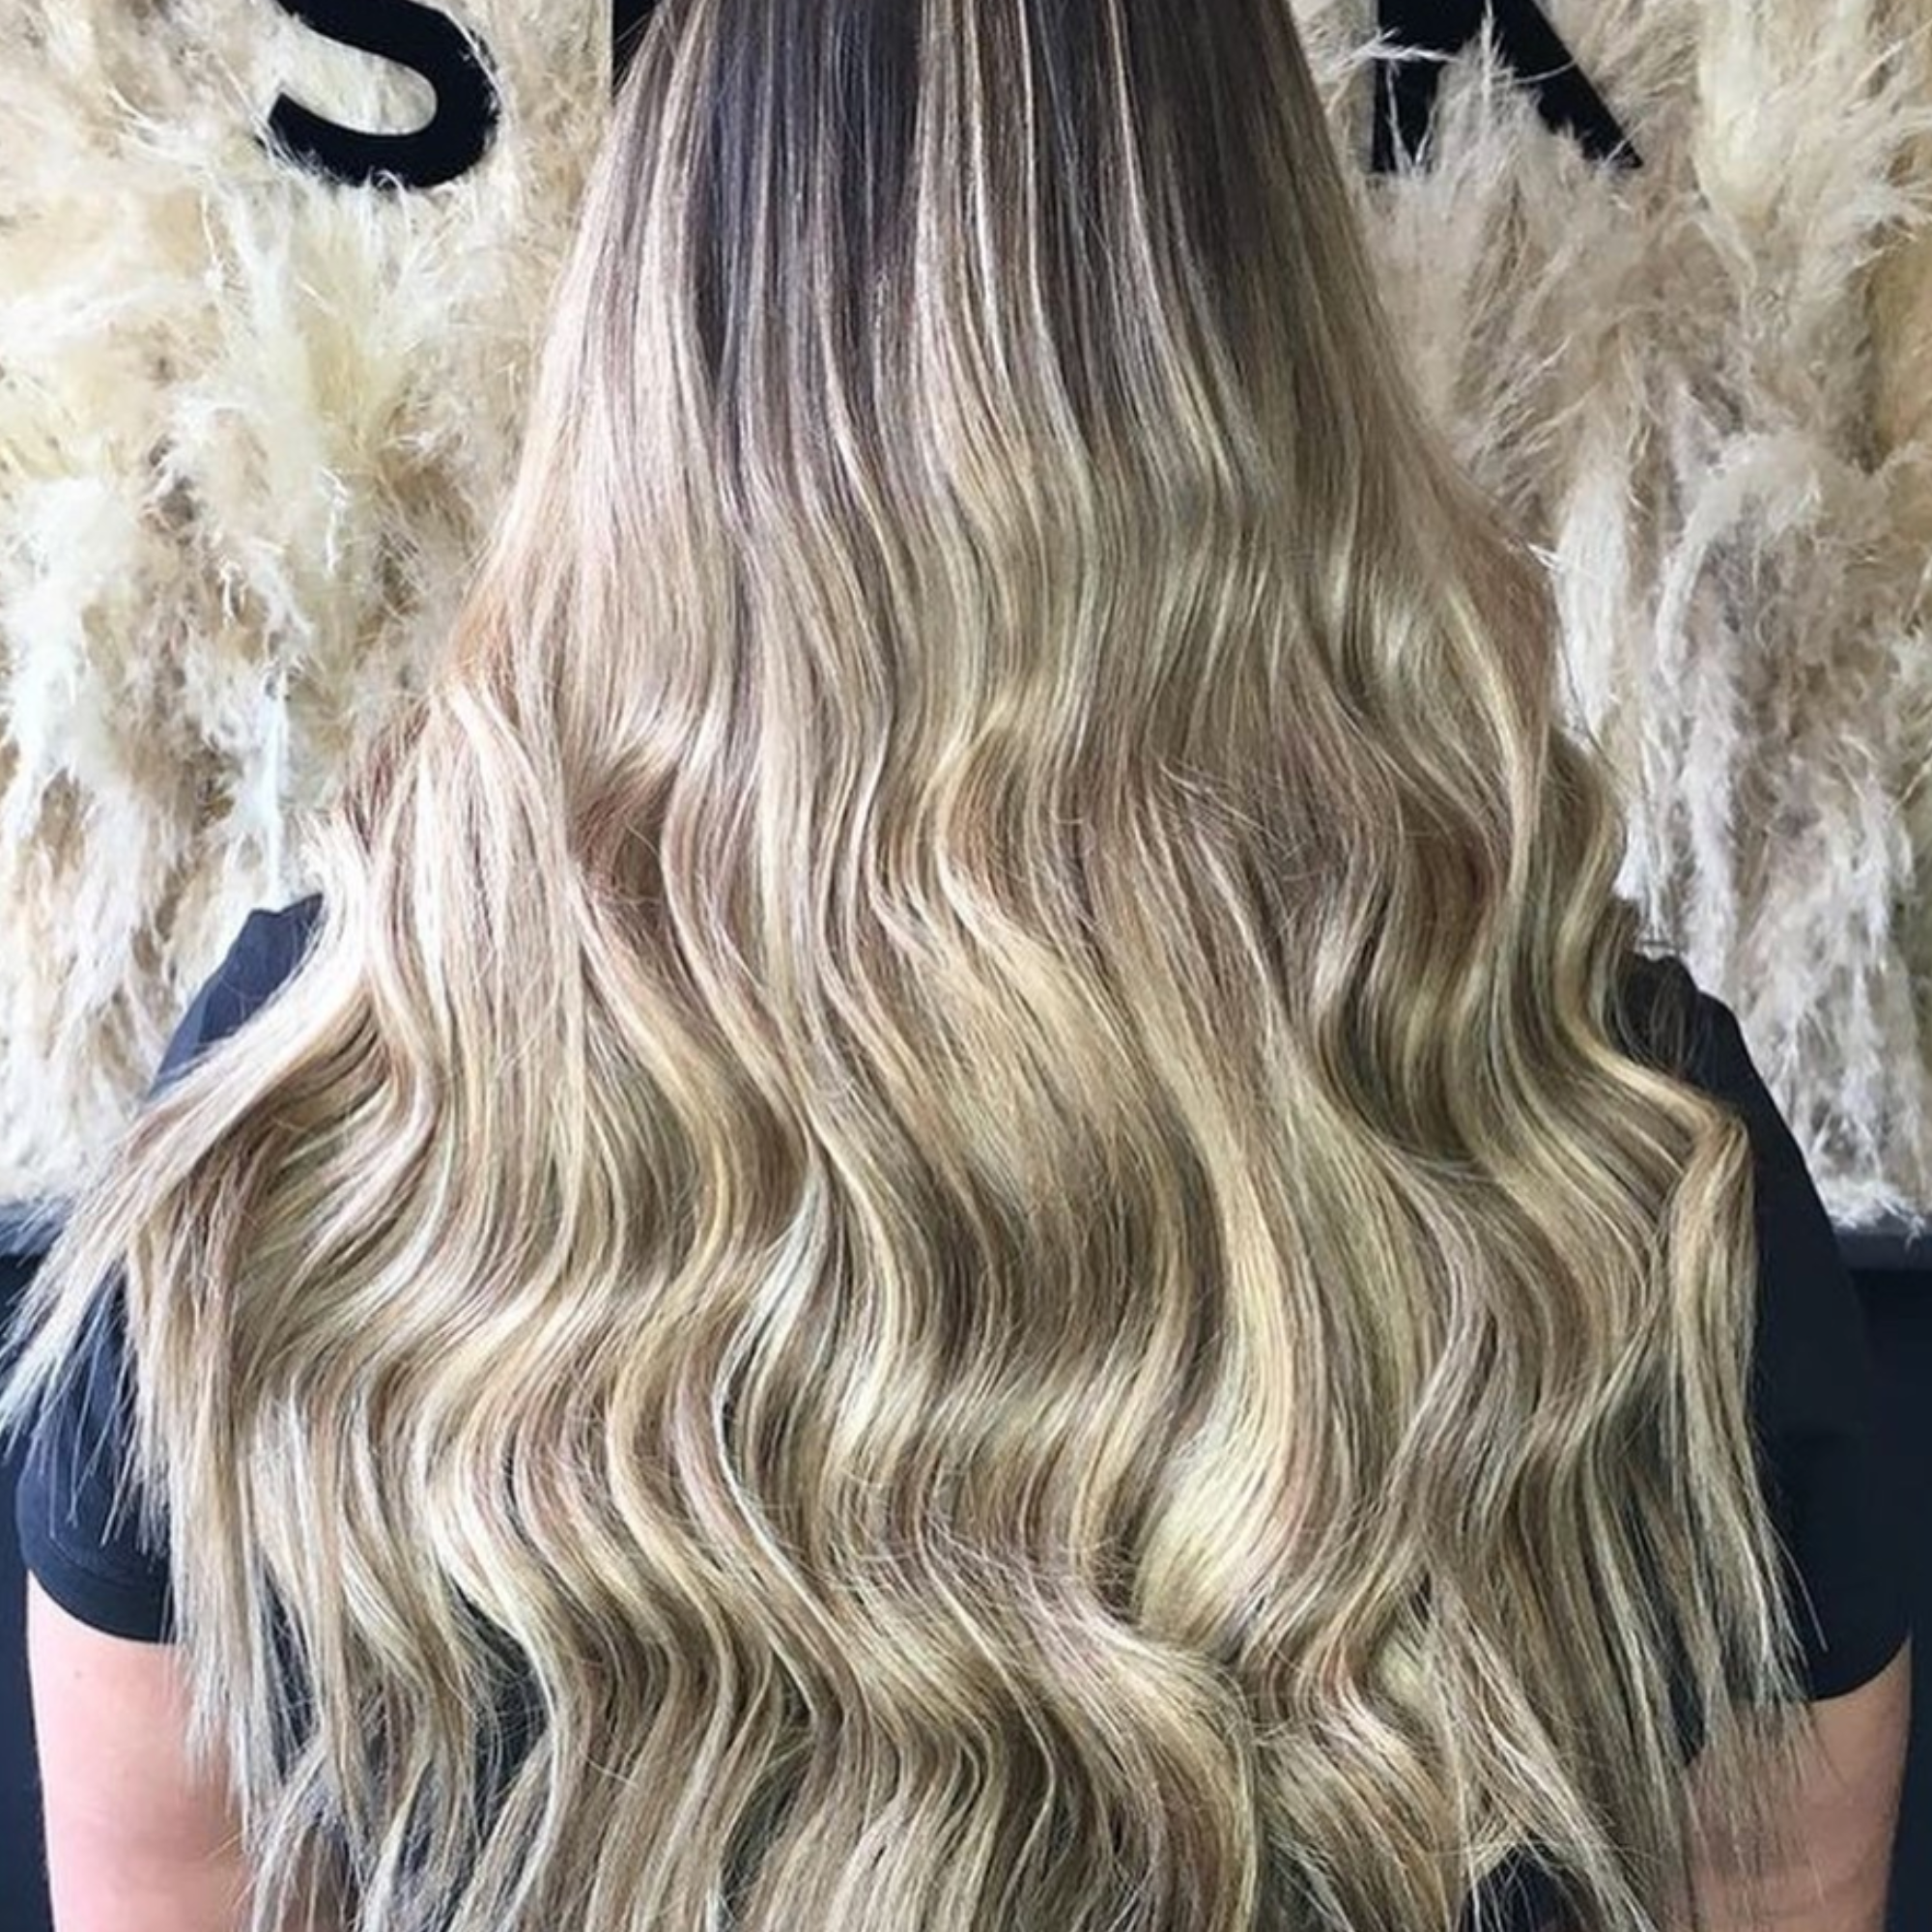 "customer wearing hair rehab london 20 inch luxe clip-in hair extensions in blonde balayage shade"